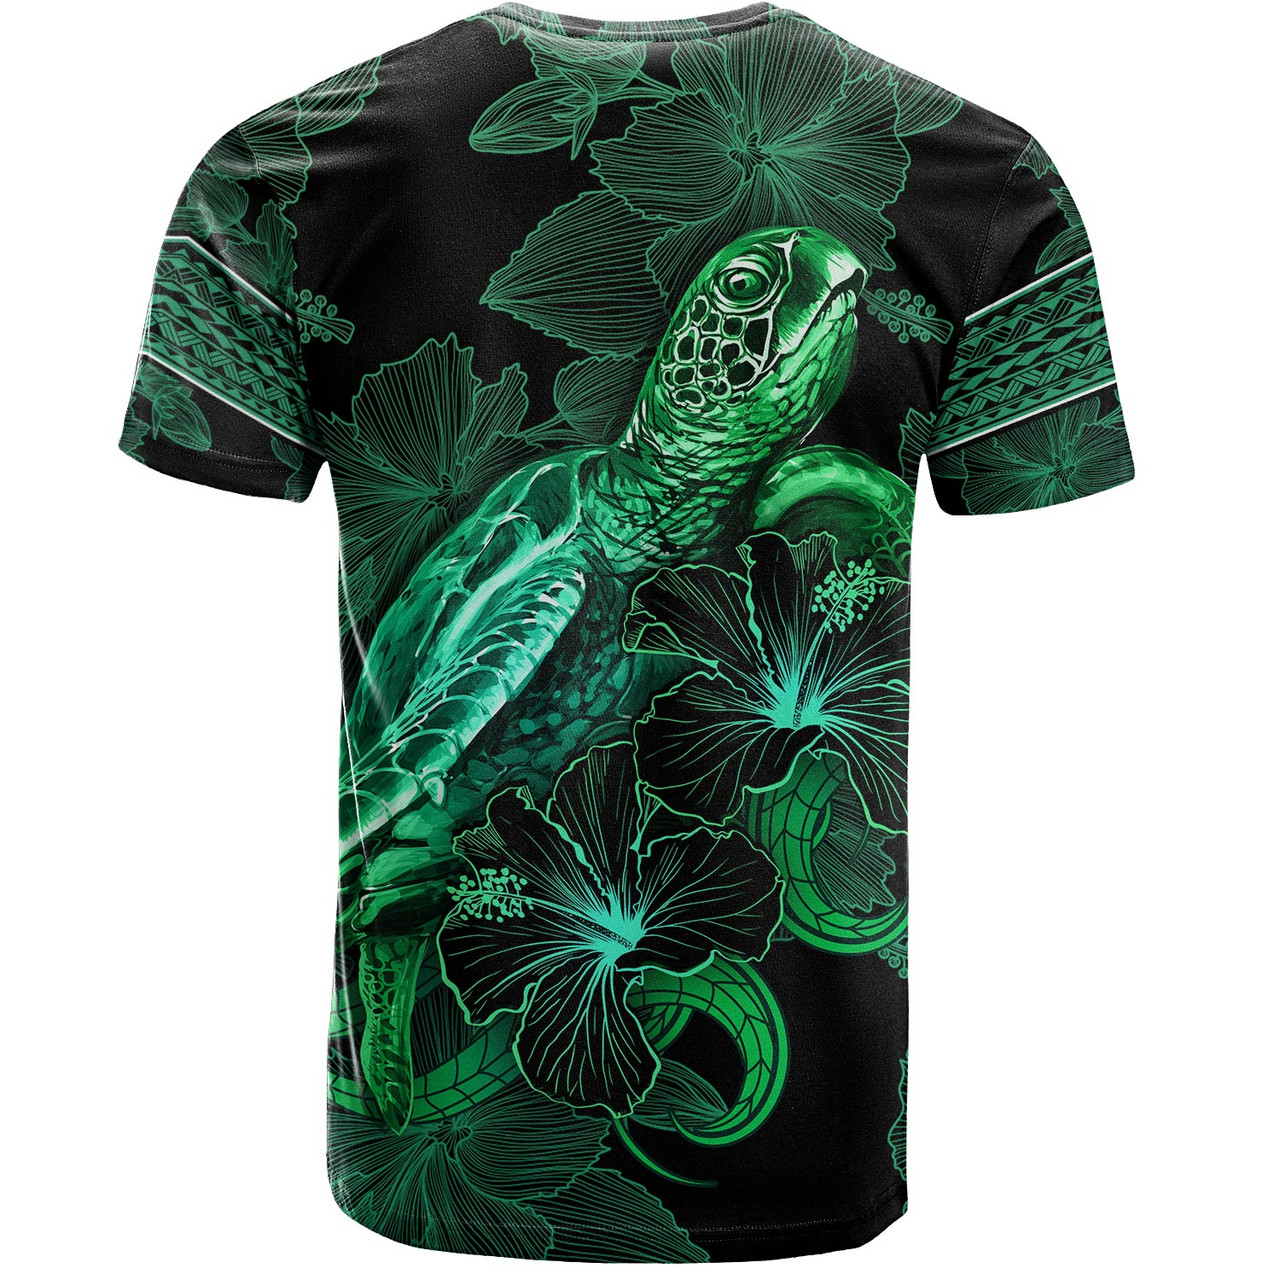 Palau T-Shirt  Sea Turtle With Blooming Hibiscus Flowers Tribal Green